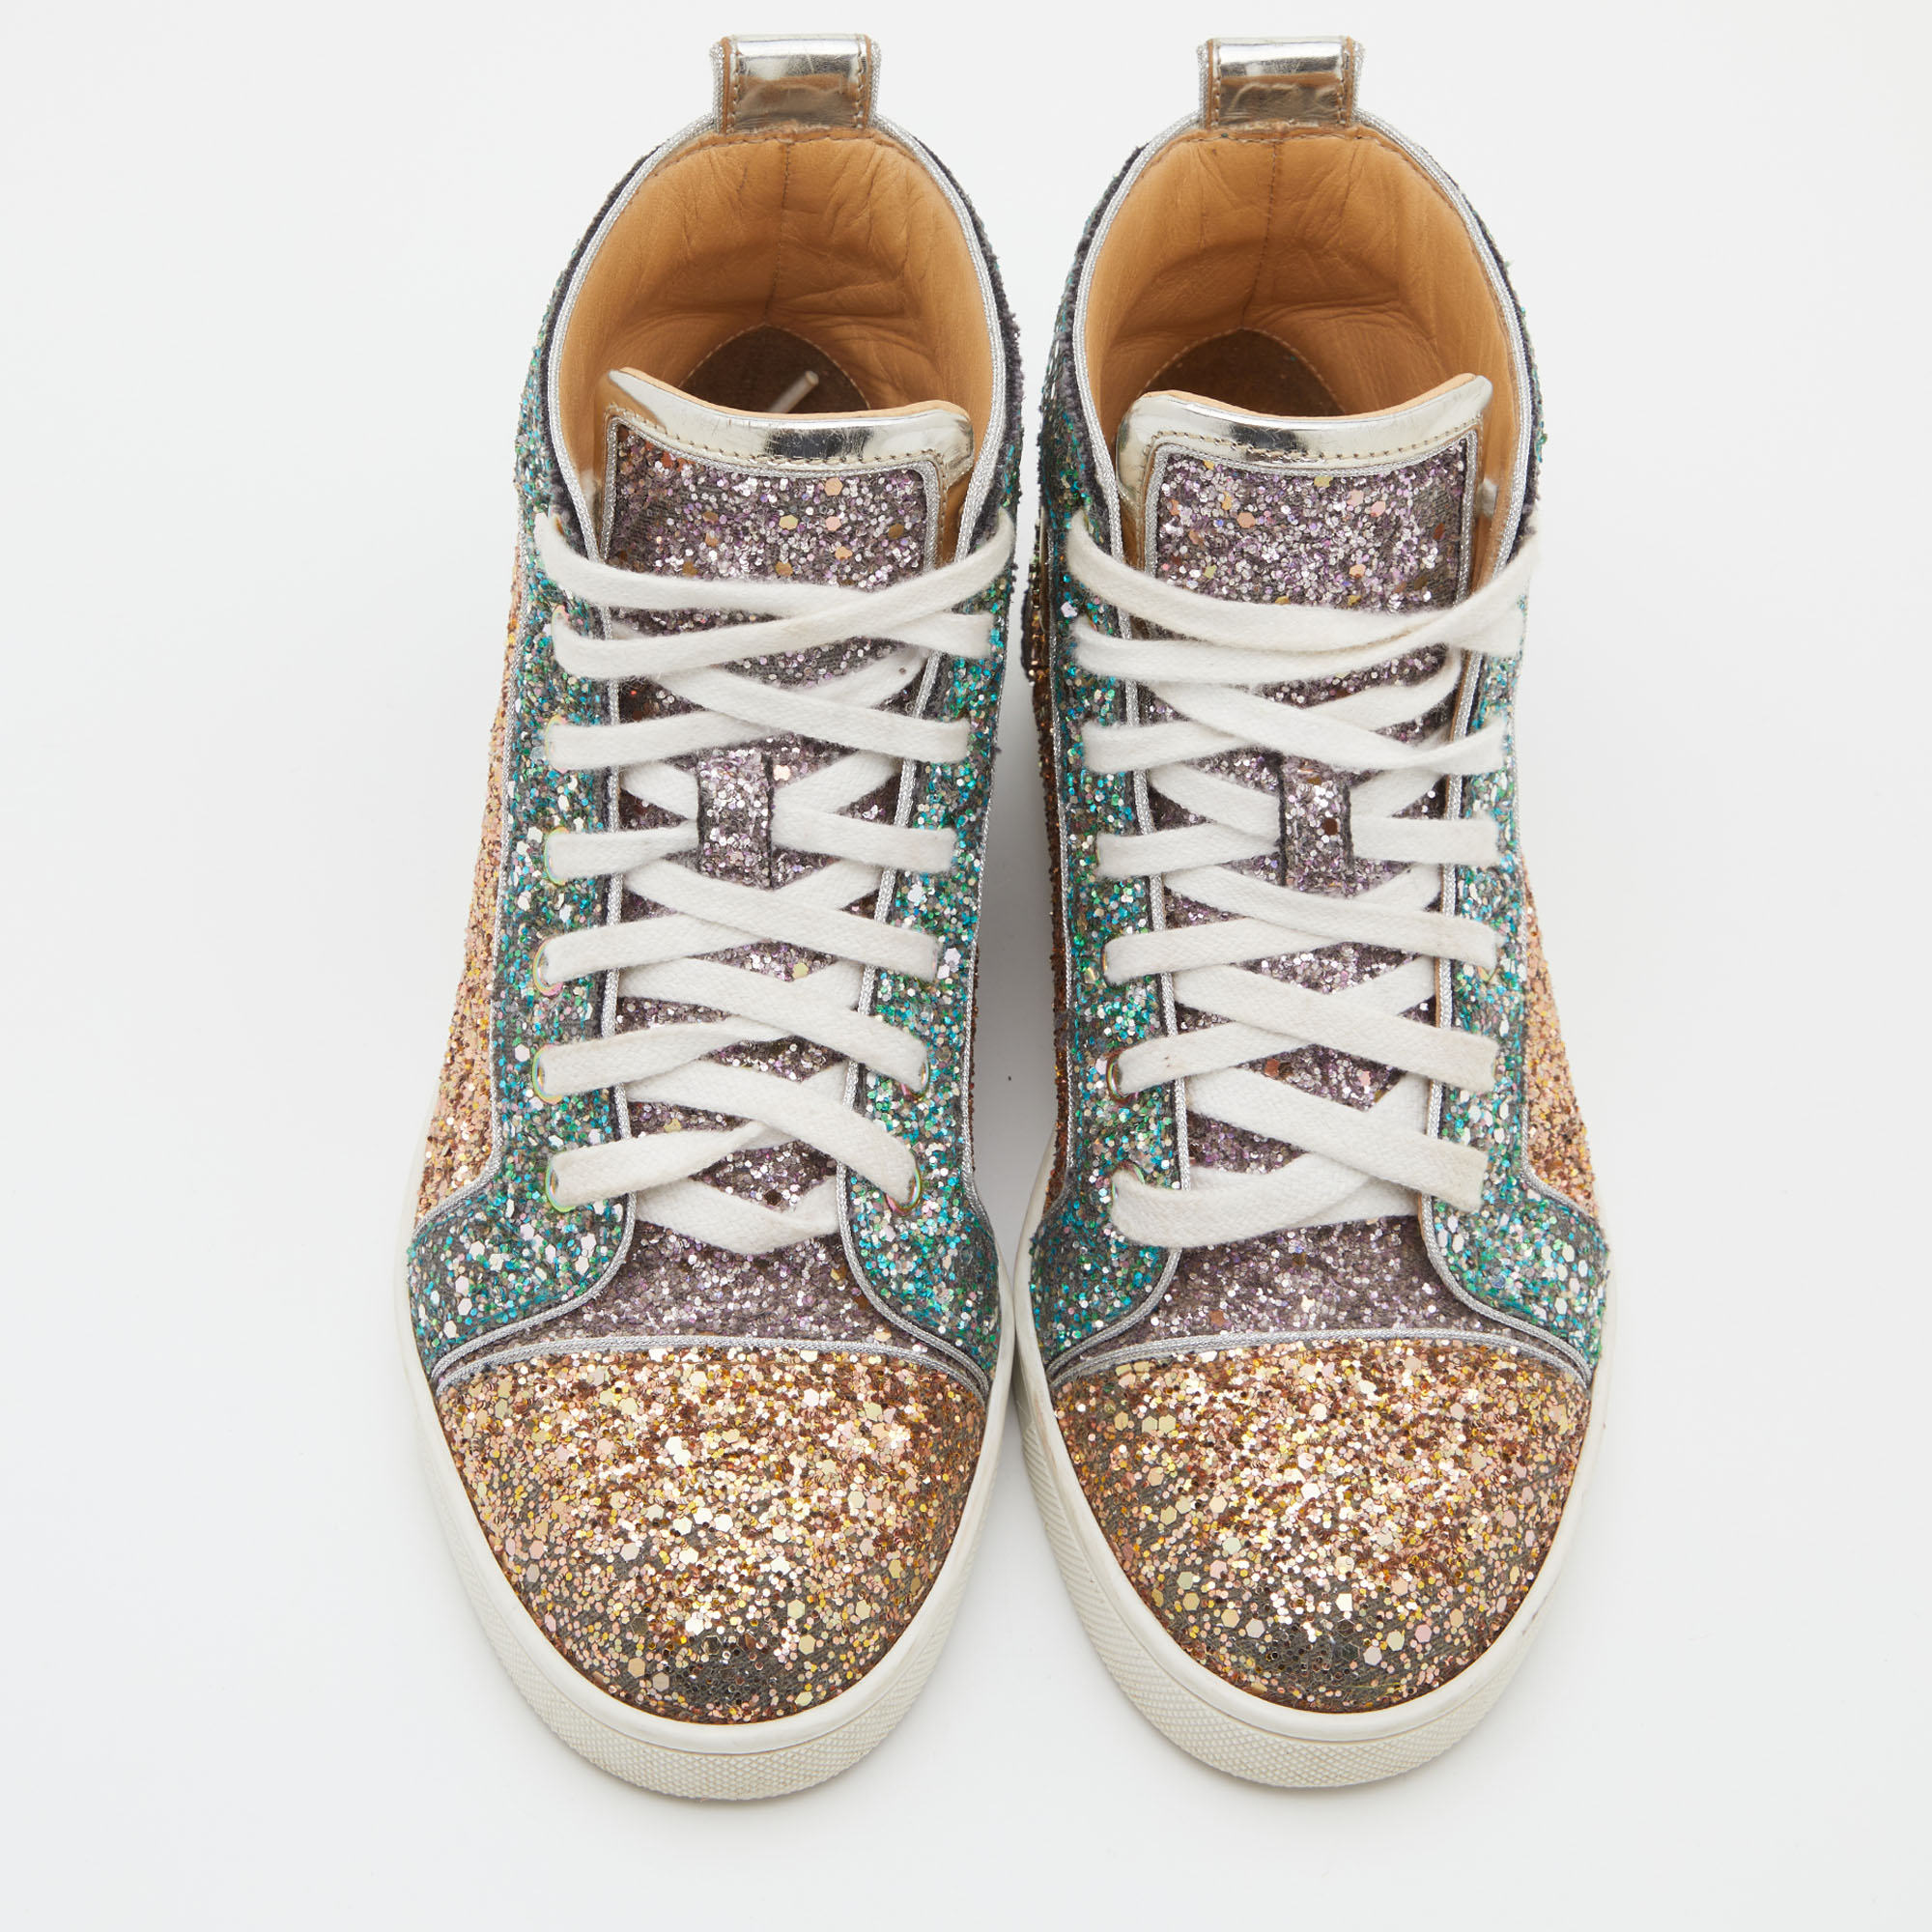 Christian Louboutin Multicolor Glitter Fabric Bip Bip High Top Sneakers Size 35.5